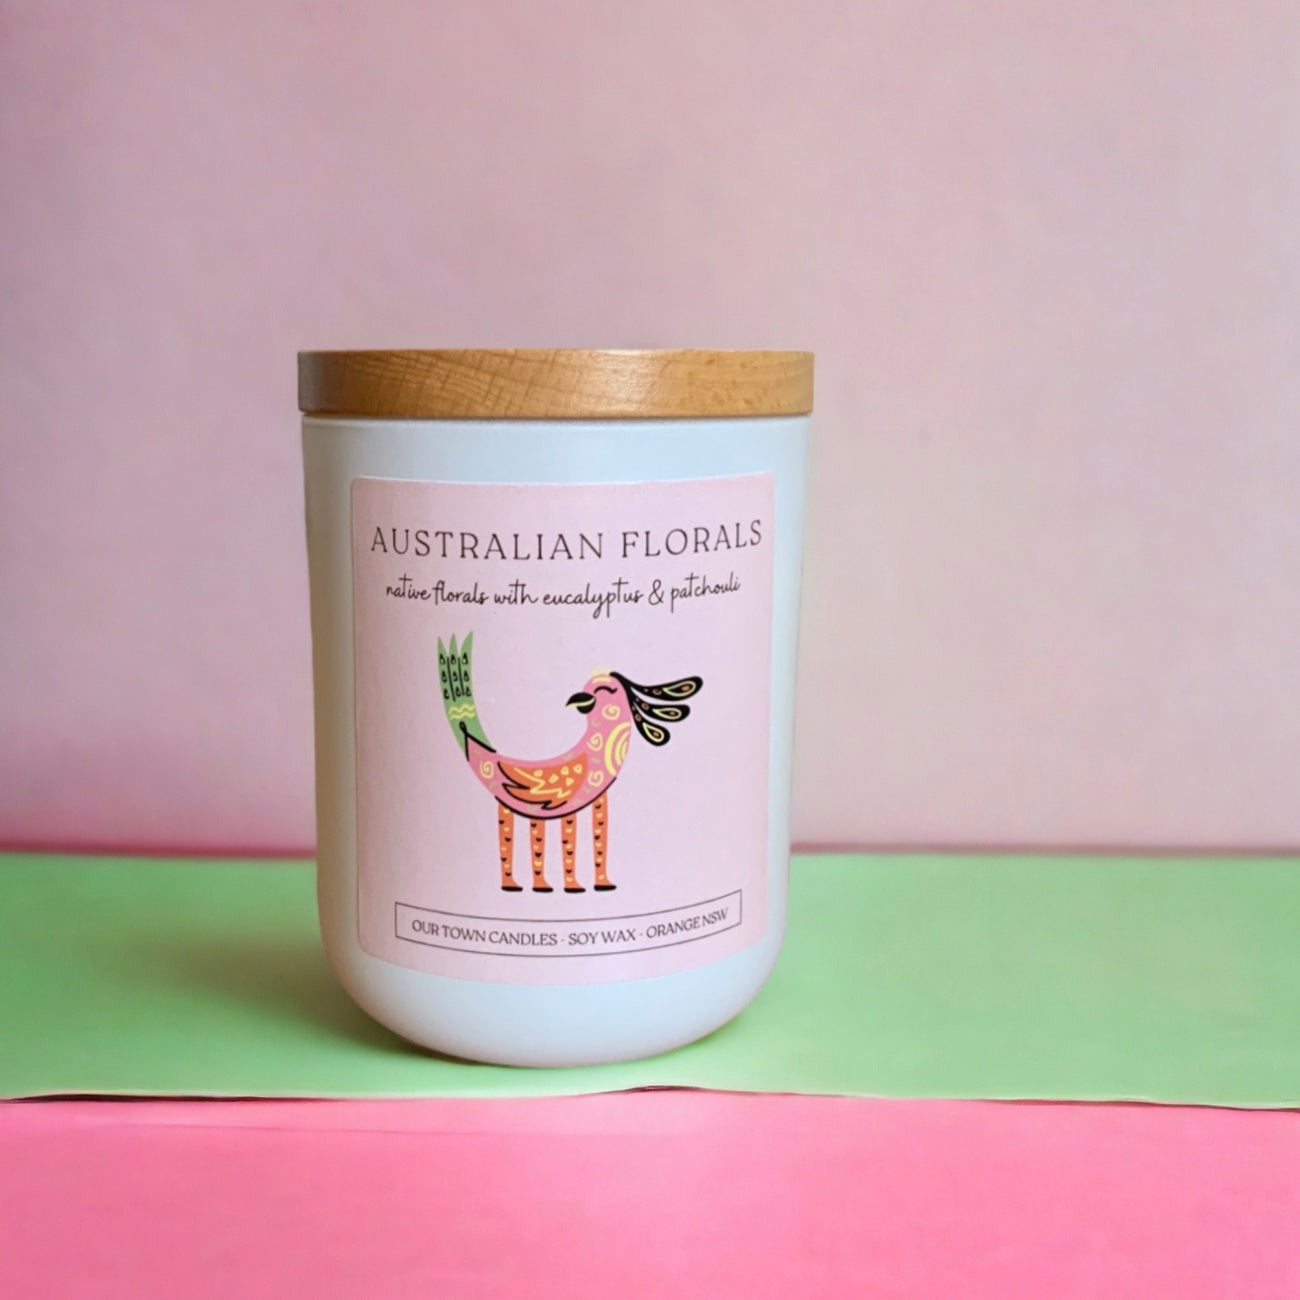 Our Town Candle - Australian Florals